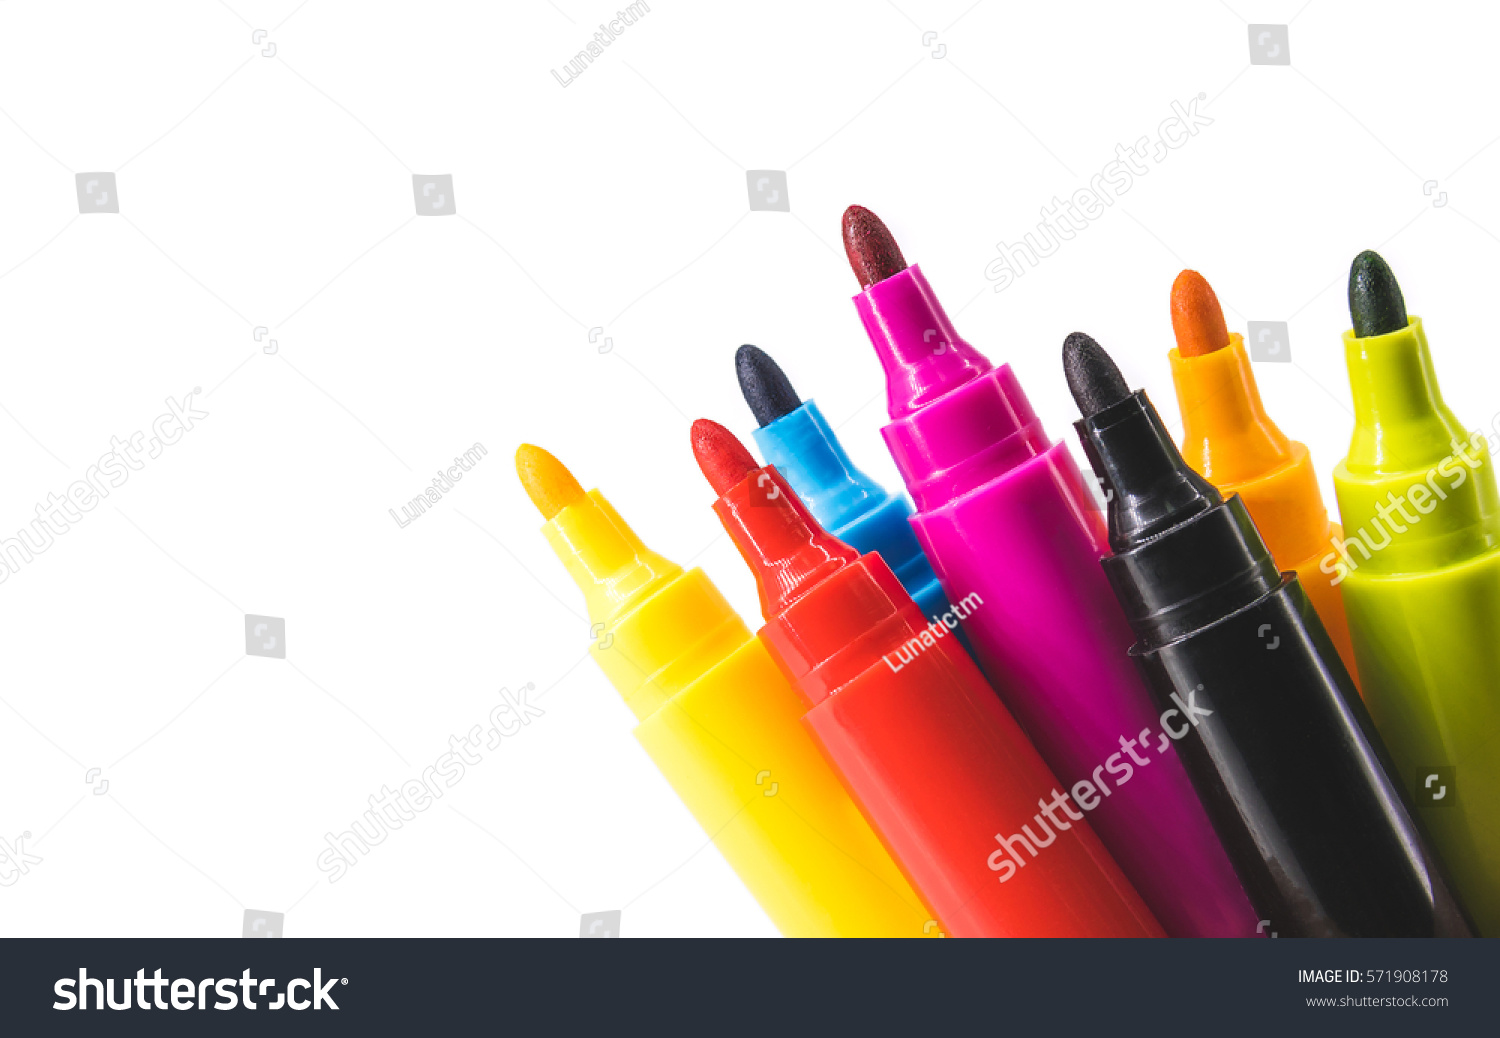 Colorful marker pen set on isolated background with clipping path. Vivid highlighter and blank space for your design or montage. #571908178